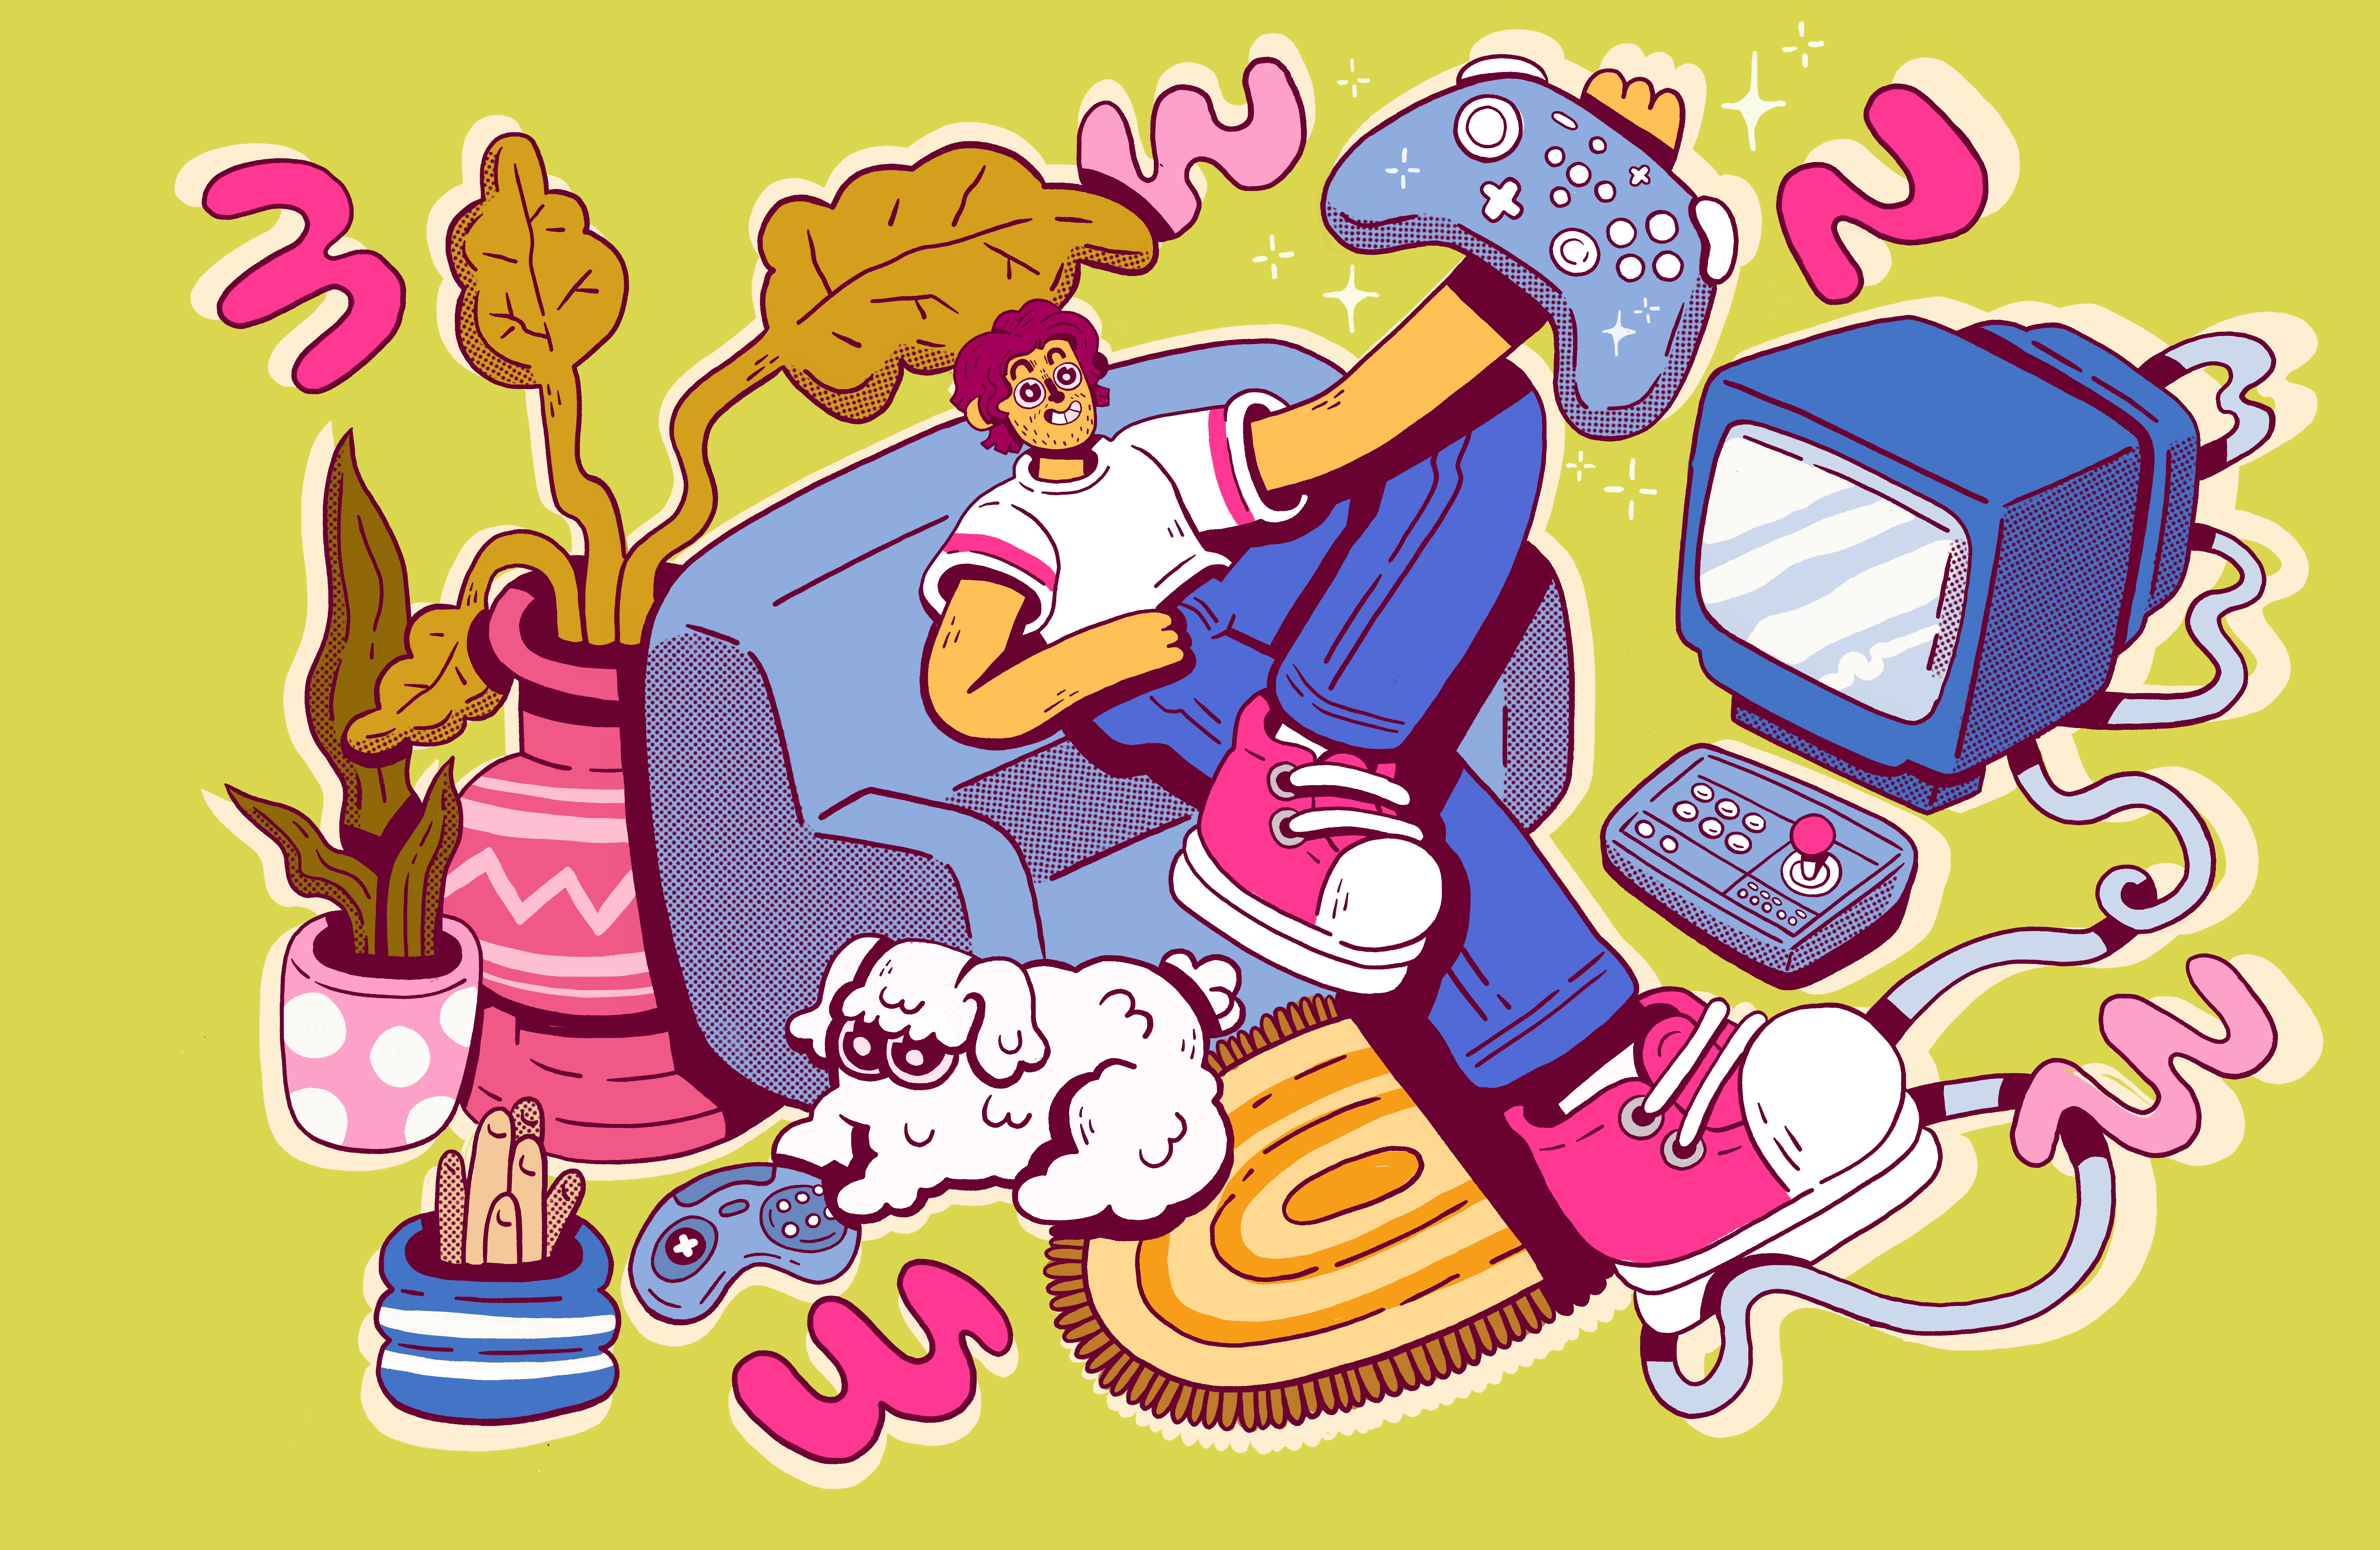 An illustration of a character sitting on a couch, holding up a controller. They are seated within a living room arrangement, surrounded by house plants, a dog, a rug, and a television. 